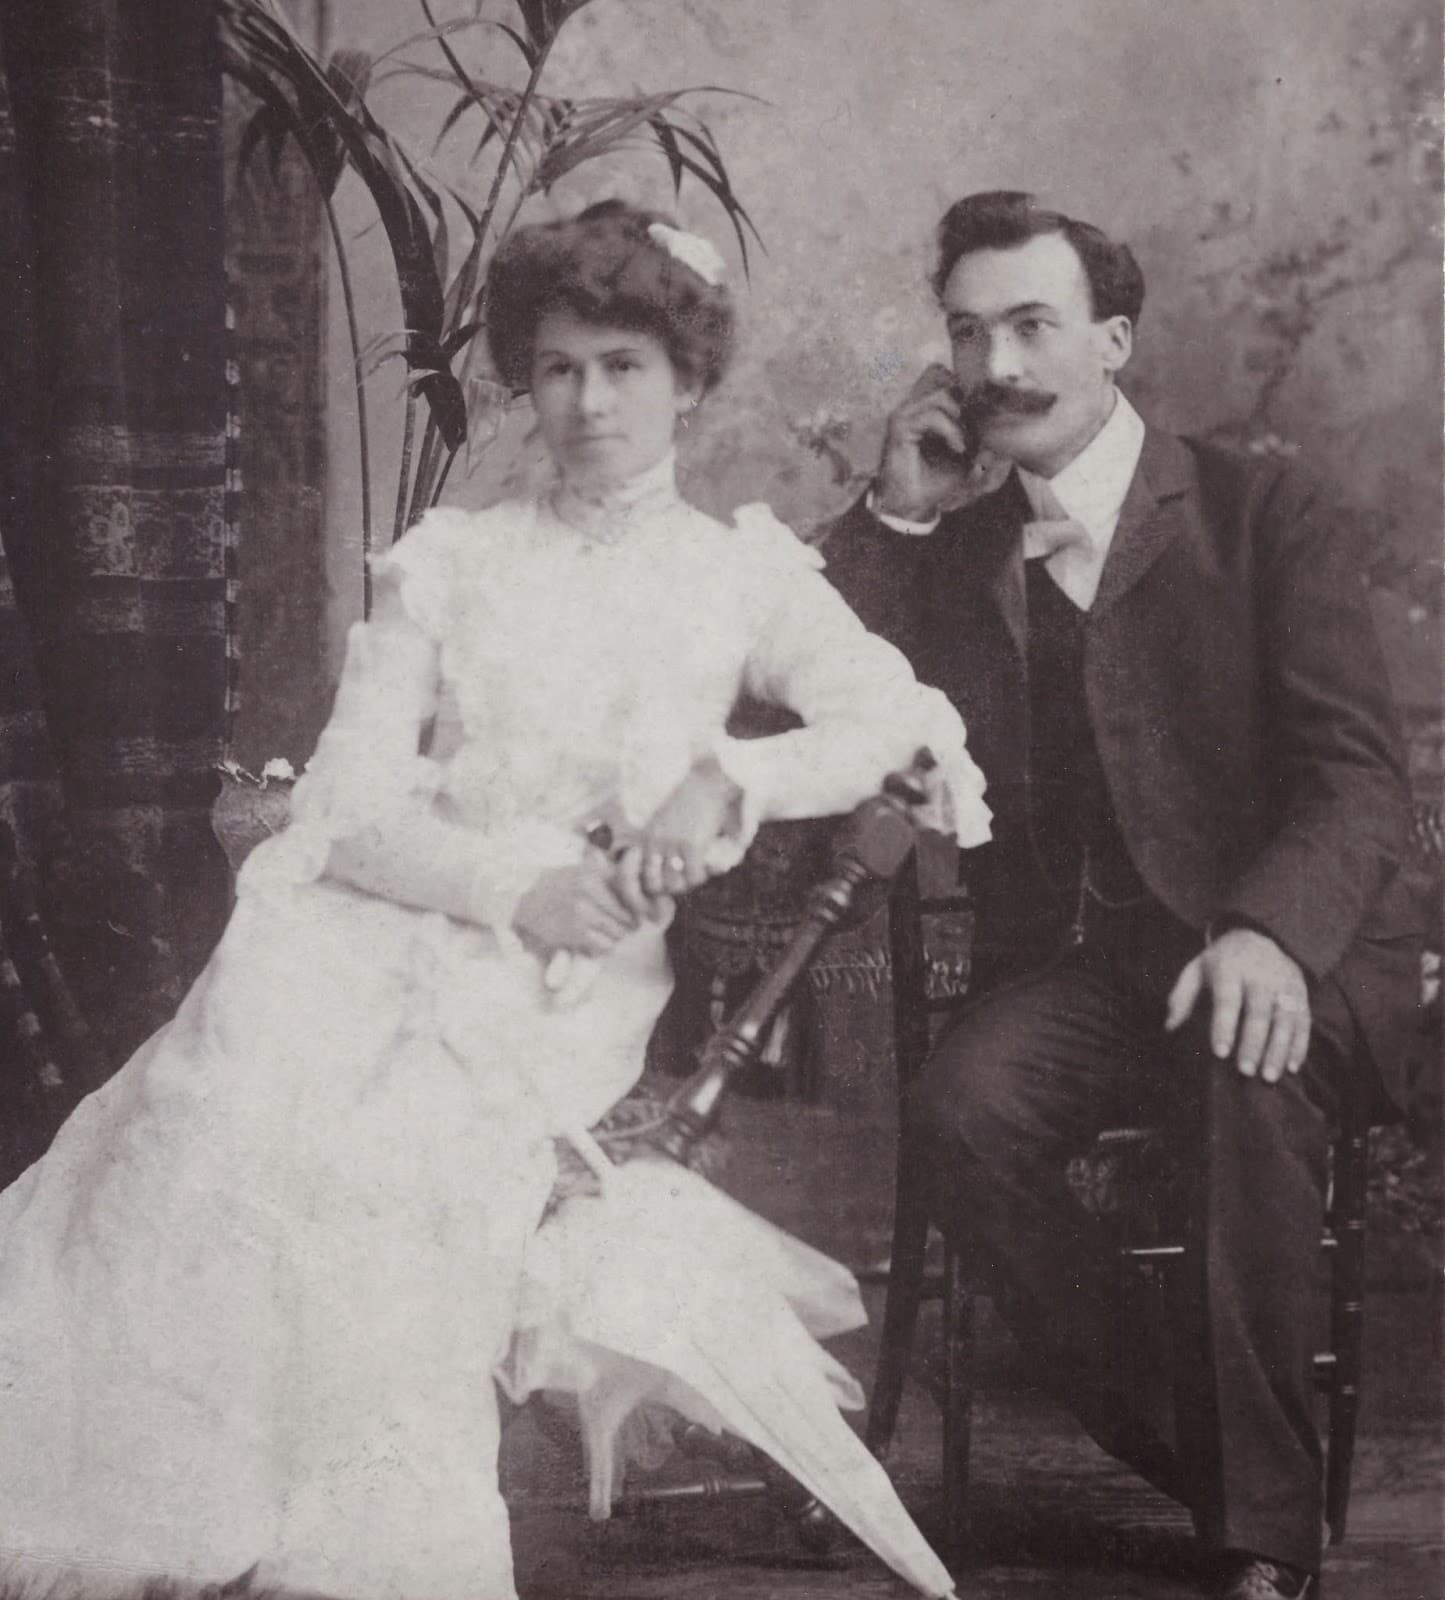 Photo of Mary and William Larkin, the builders and first occupants of the future Whispers pub. William Larkin was also responsible for the construction of several brick homes in the Westboro area as well, according to his grandchildren.